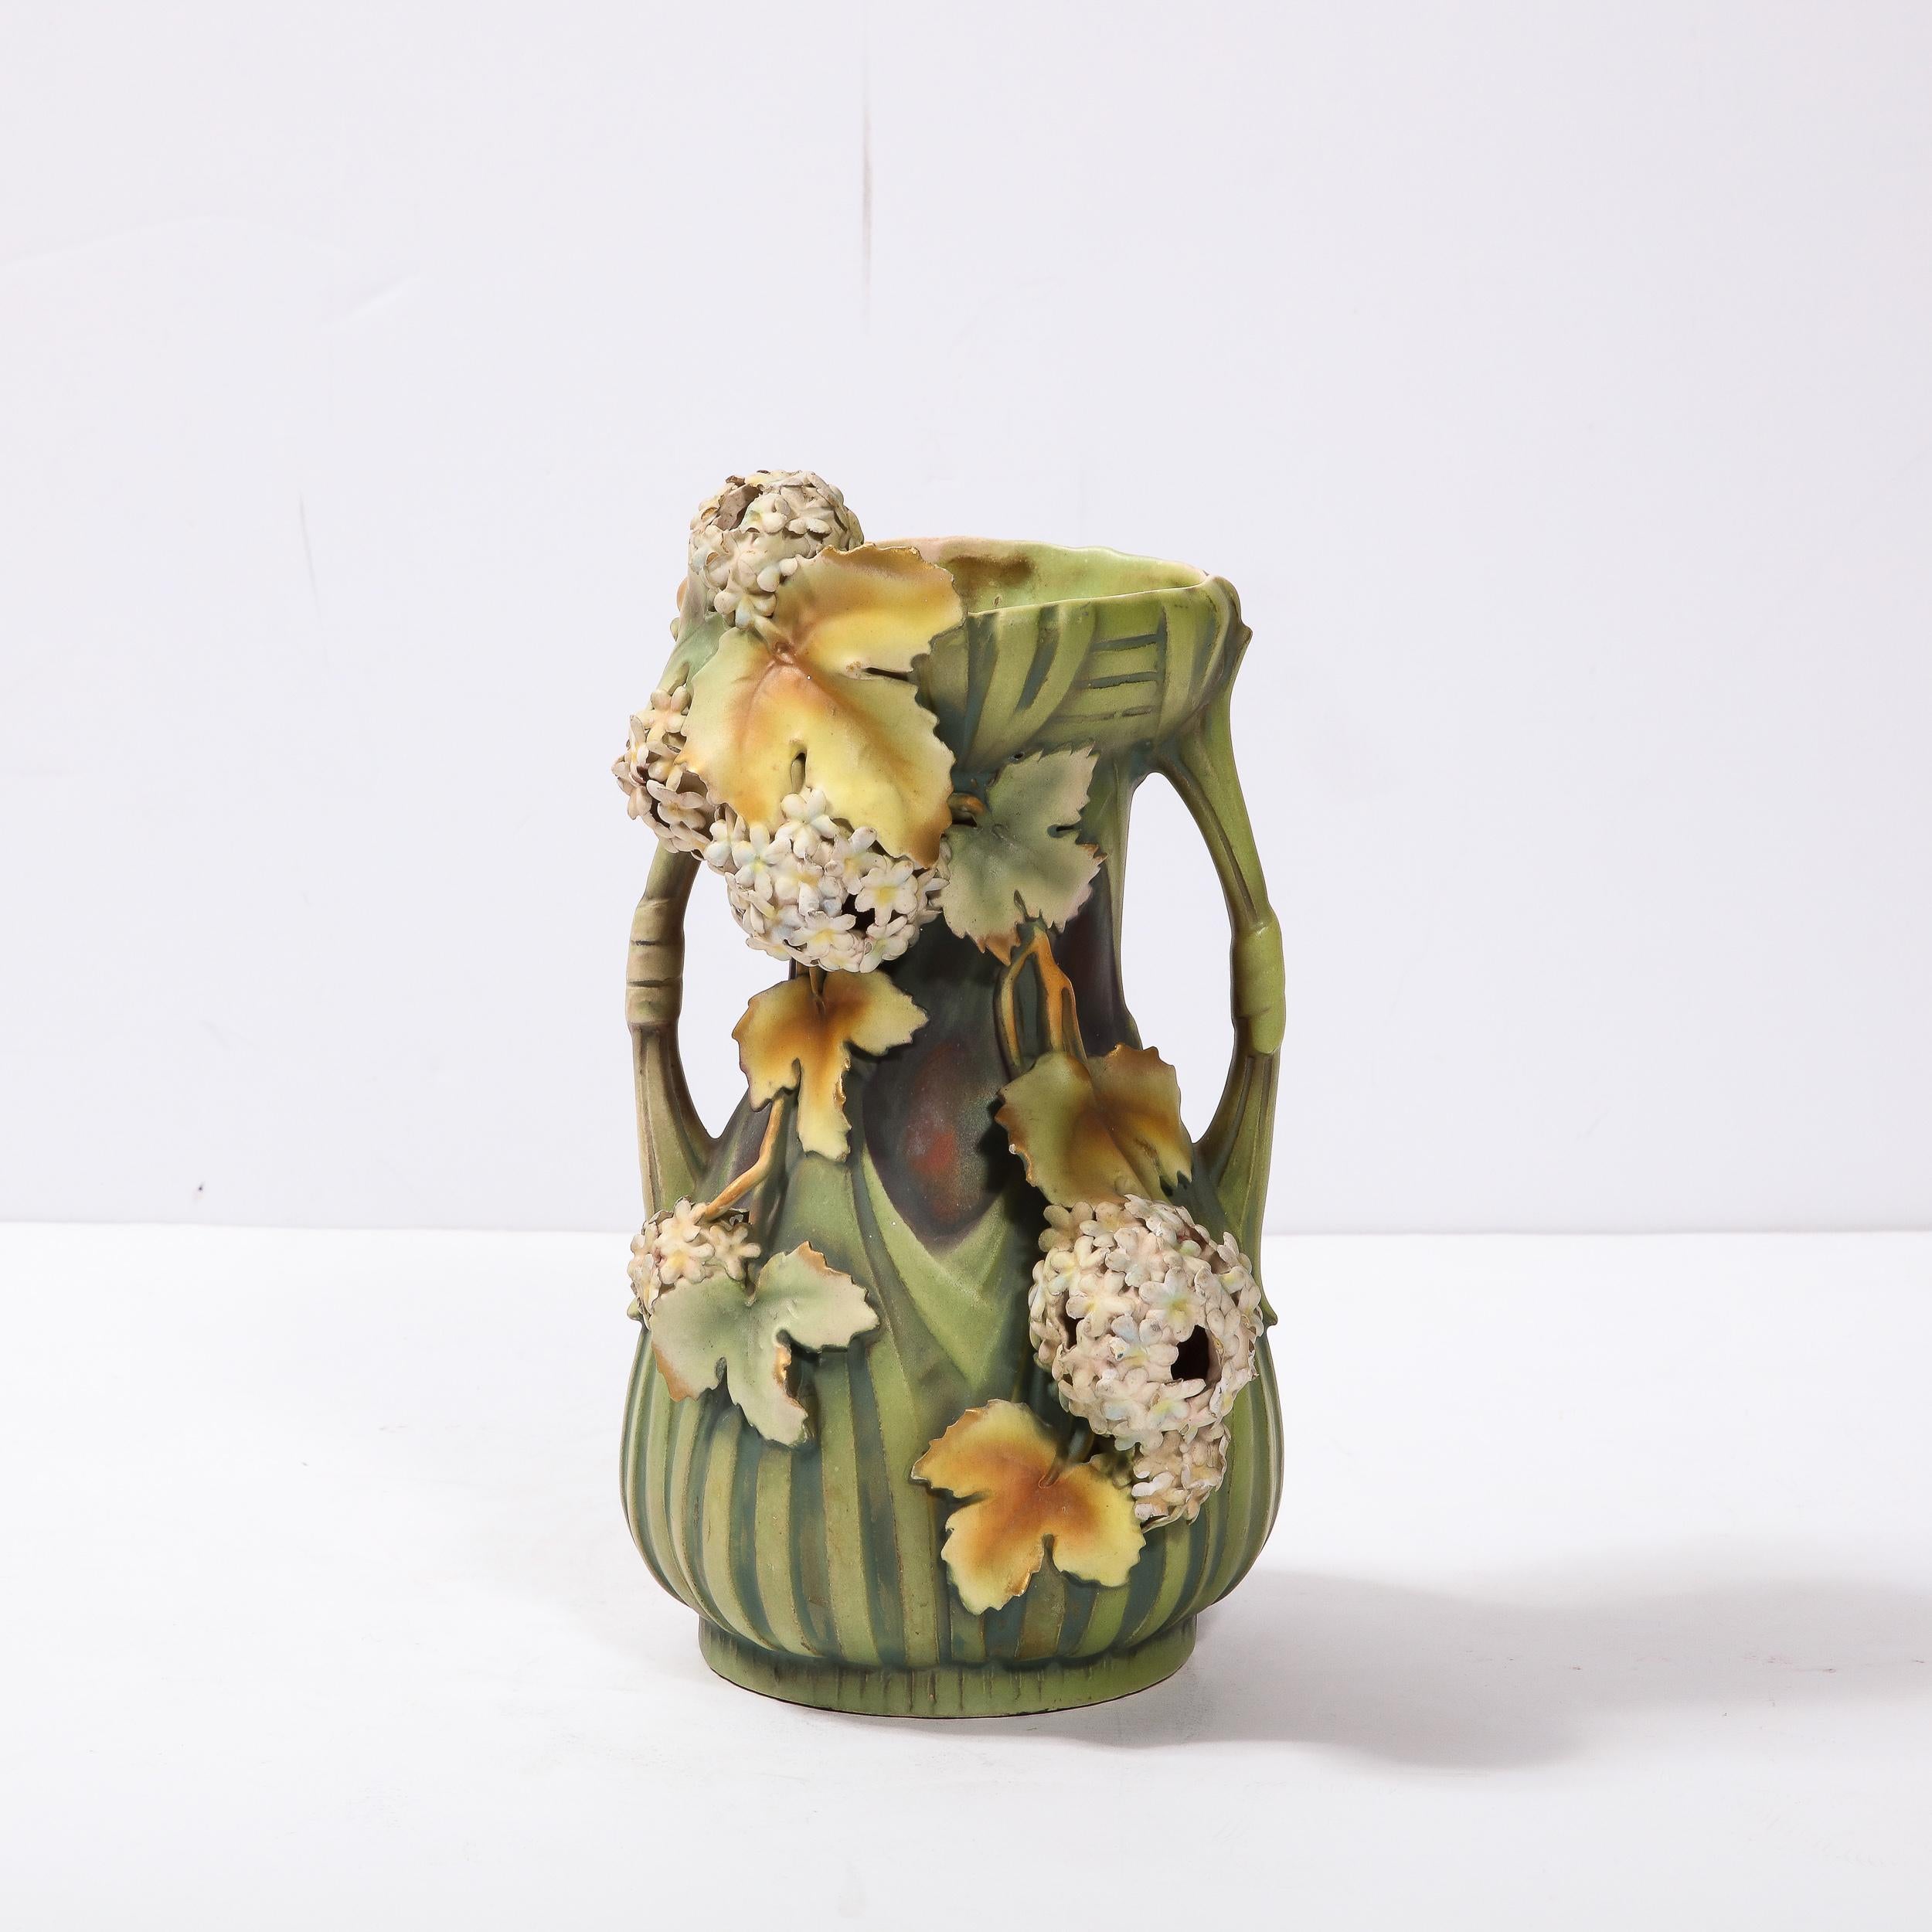 This exceptional ceramic Art Nouveau vase was created by the esteemed Austrian potter Robert Hanke circa 1900. It features a cylindrical body with a cinched mid sectioned and sculptural cylindrical open bow form supports that extend out from the